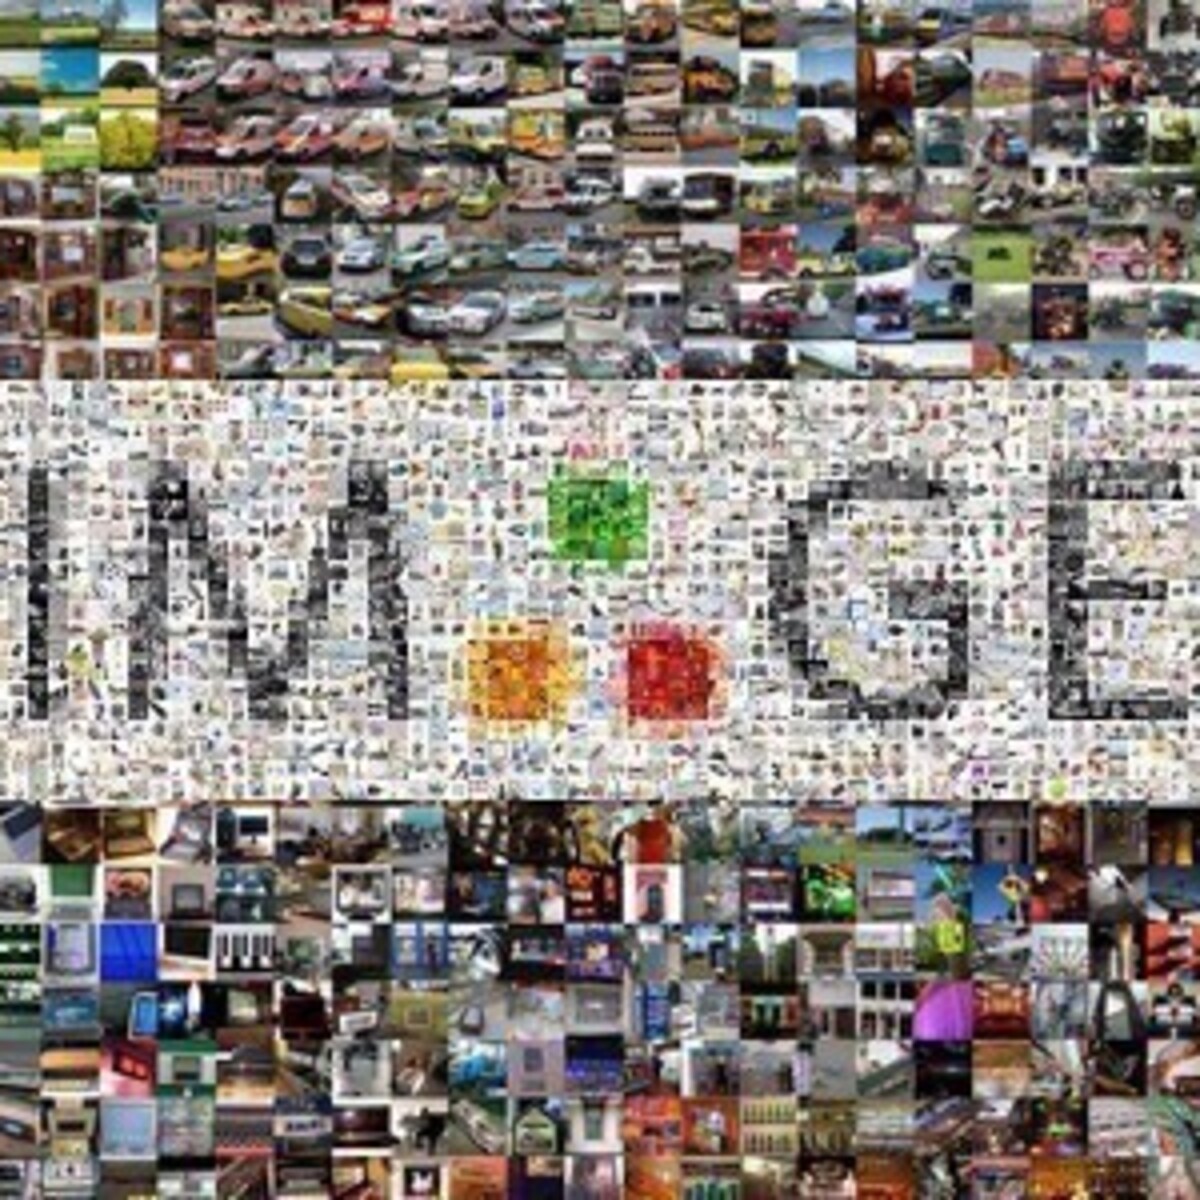 How Many Images In Imagenet